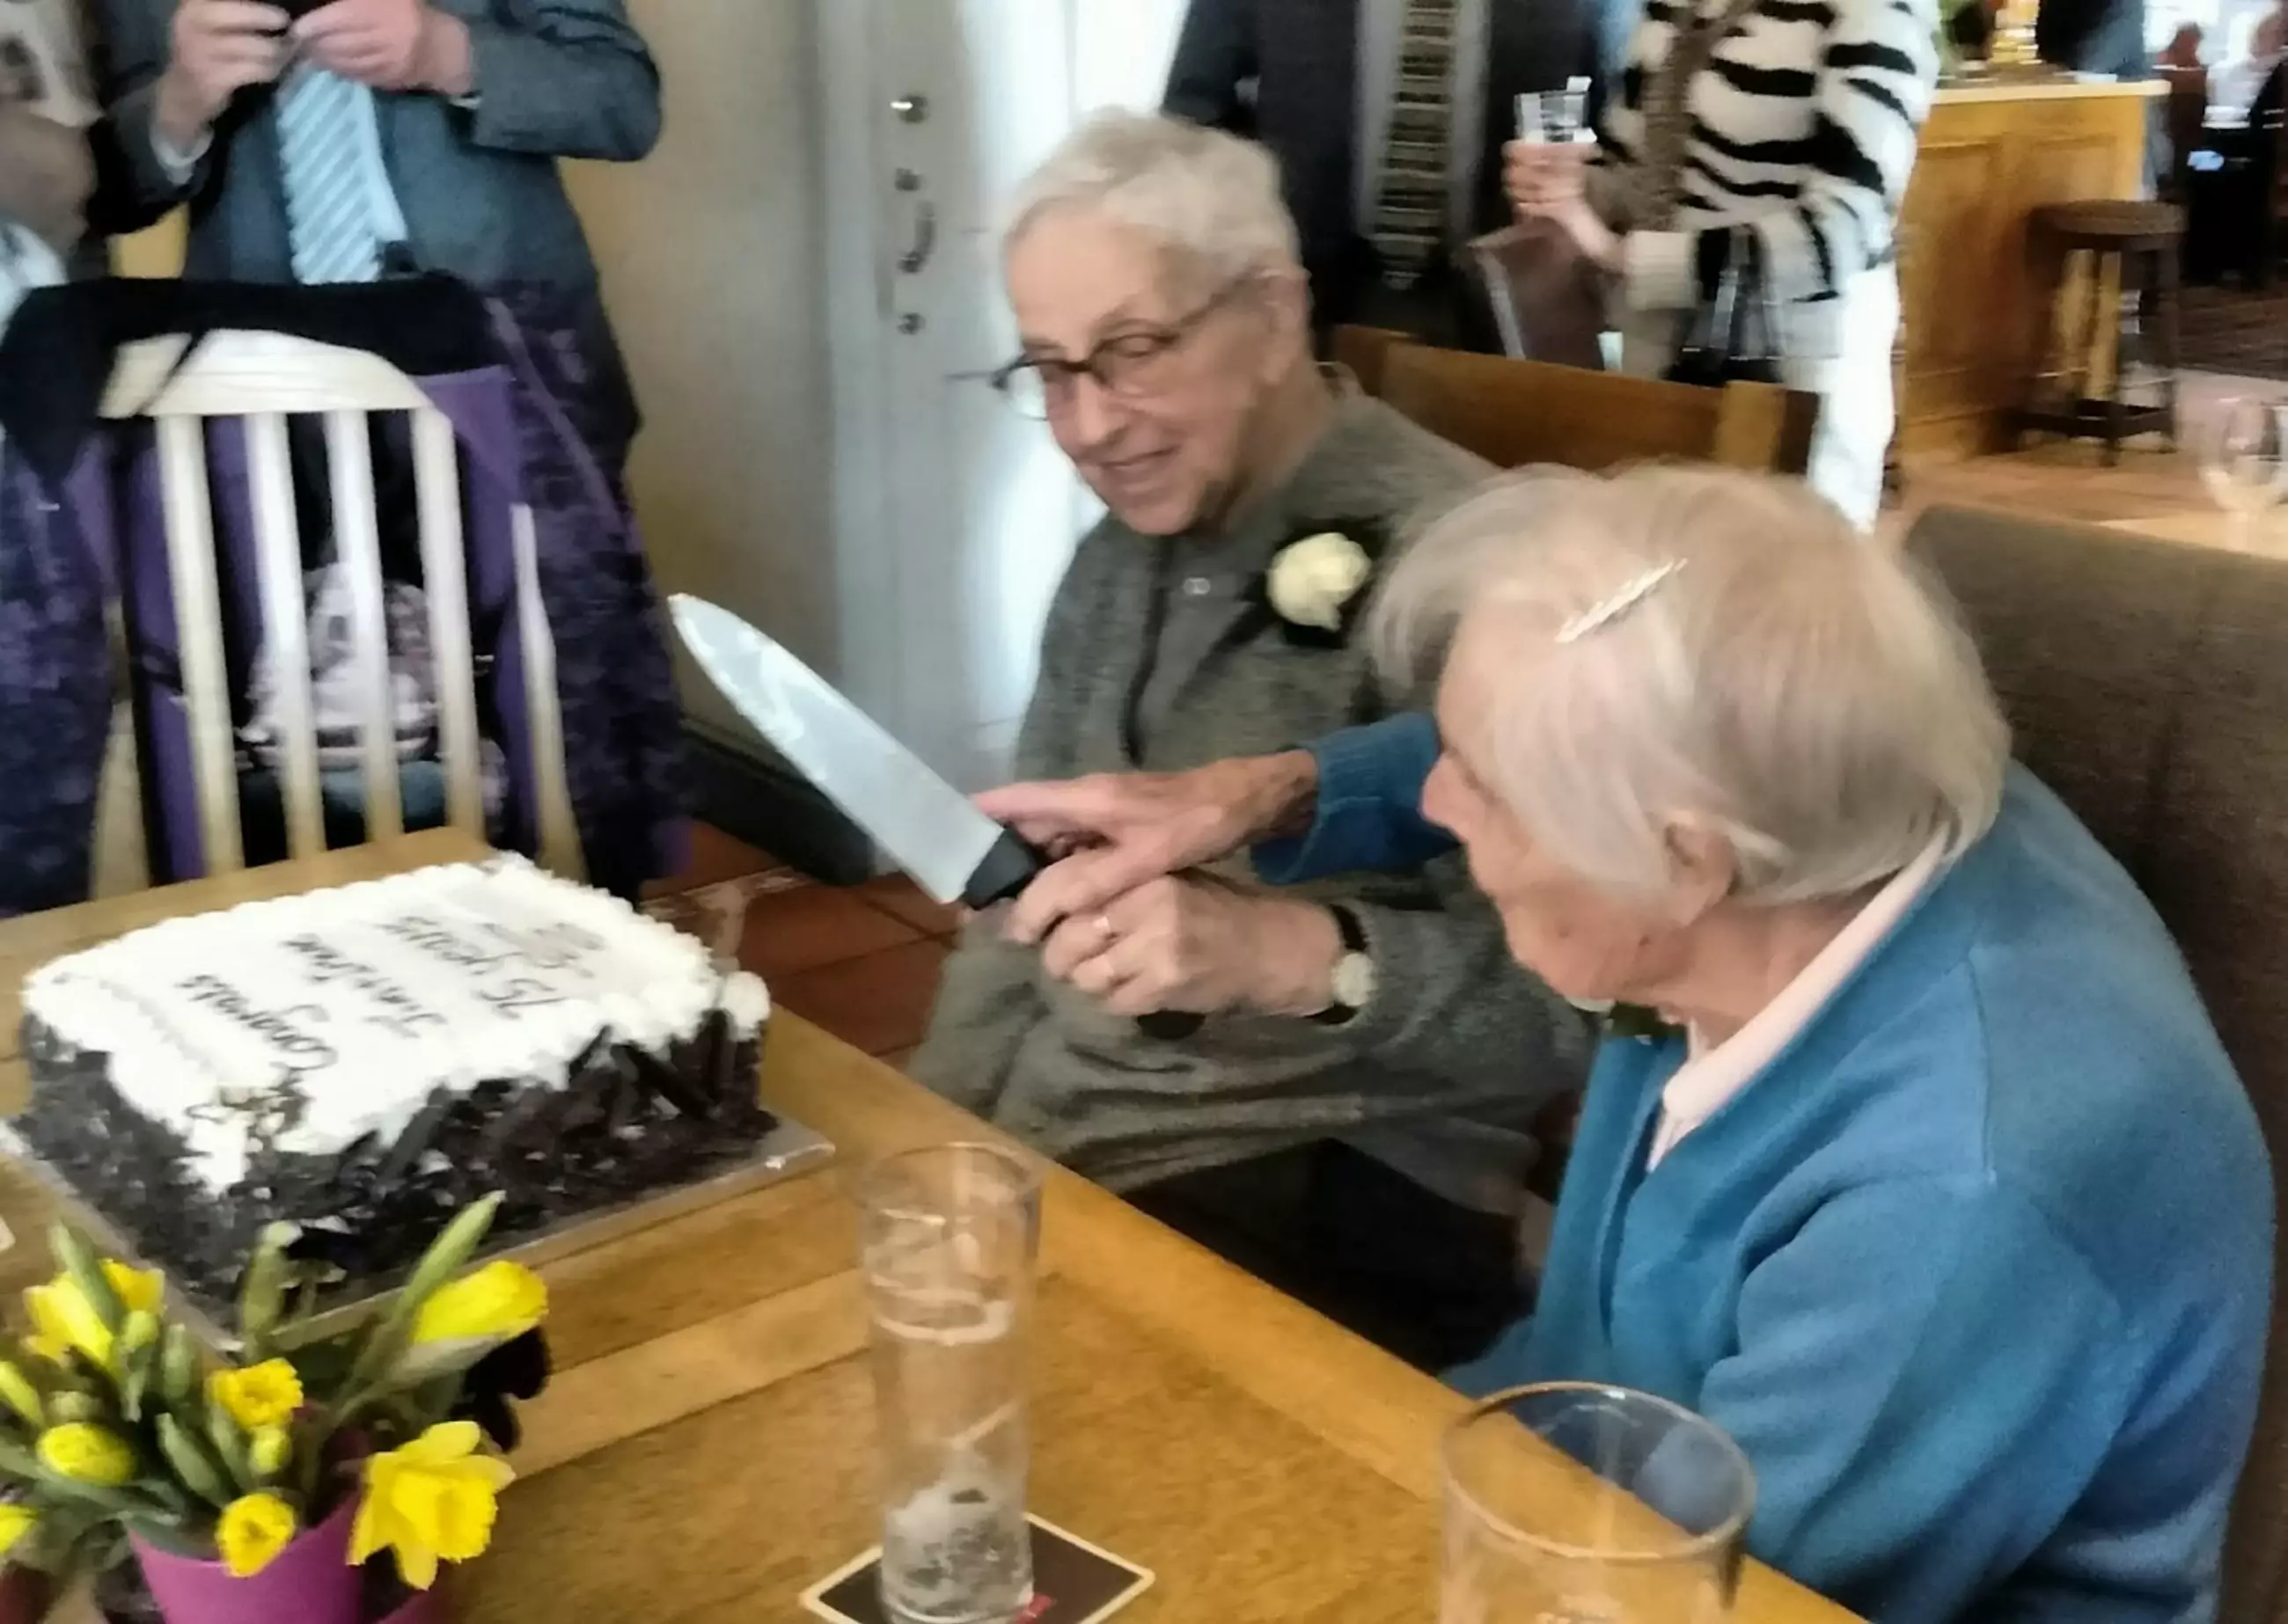 They renewed their vows on their 75th wedding anniversary, while family and friends looked on.